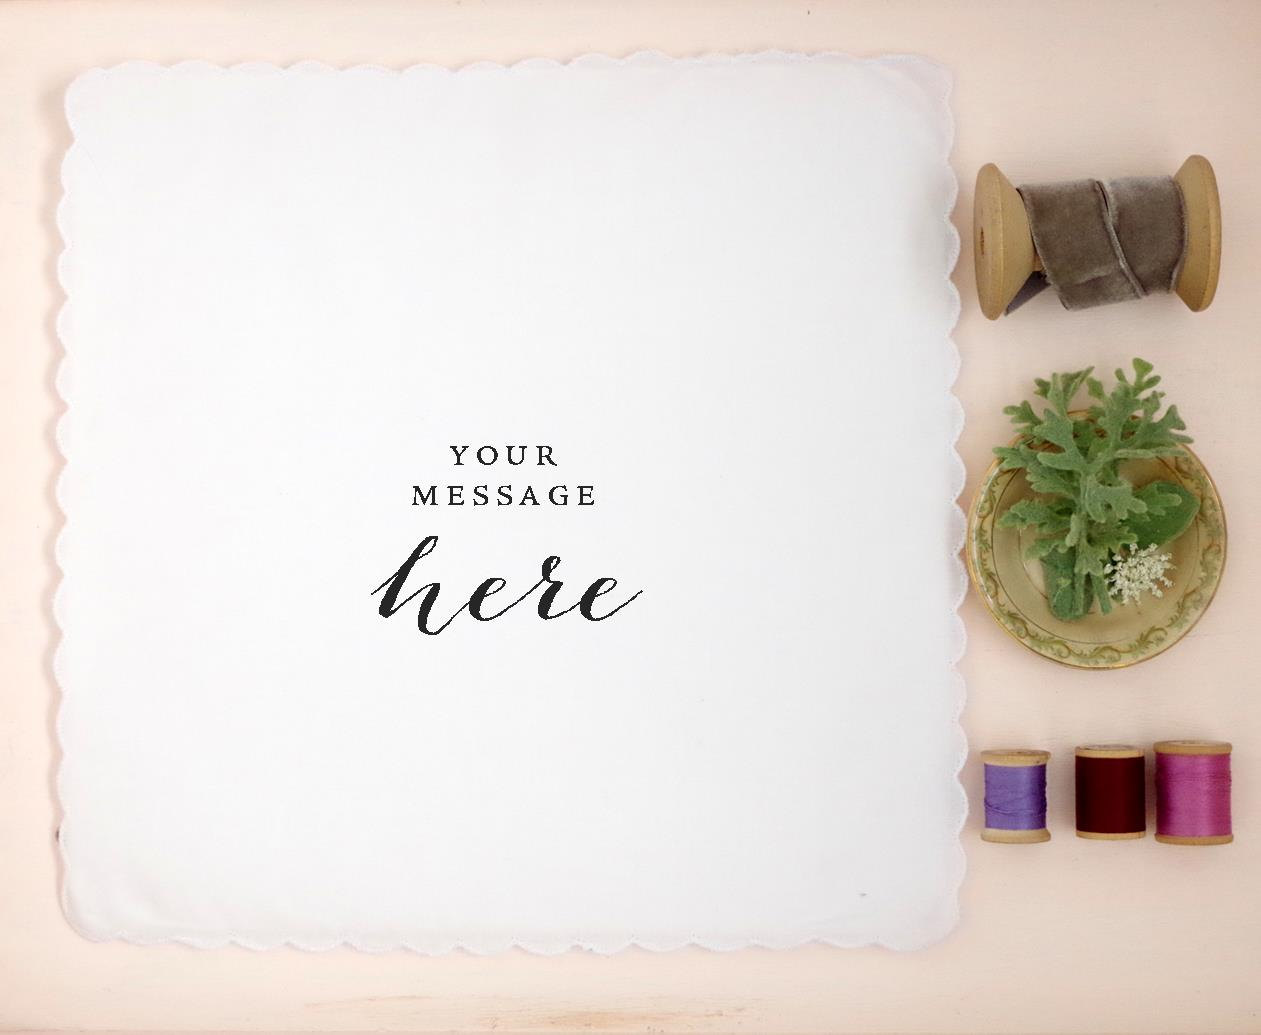 You can have a custom hankie made from your handwriting. Cute gift idea! | personalized wedding handkerchiefs | https://emmalinebride.com/gifts/personalized-wedding-handkerchiefs/